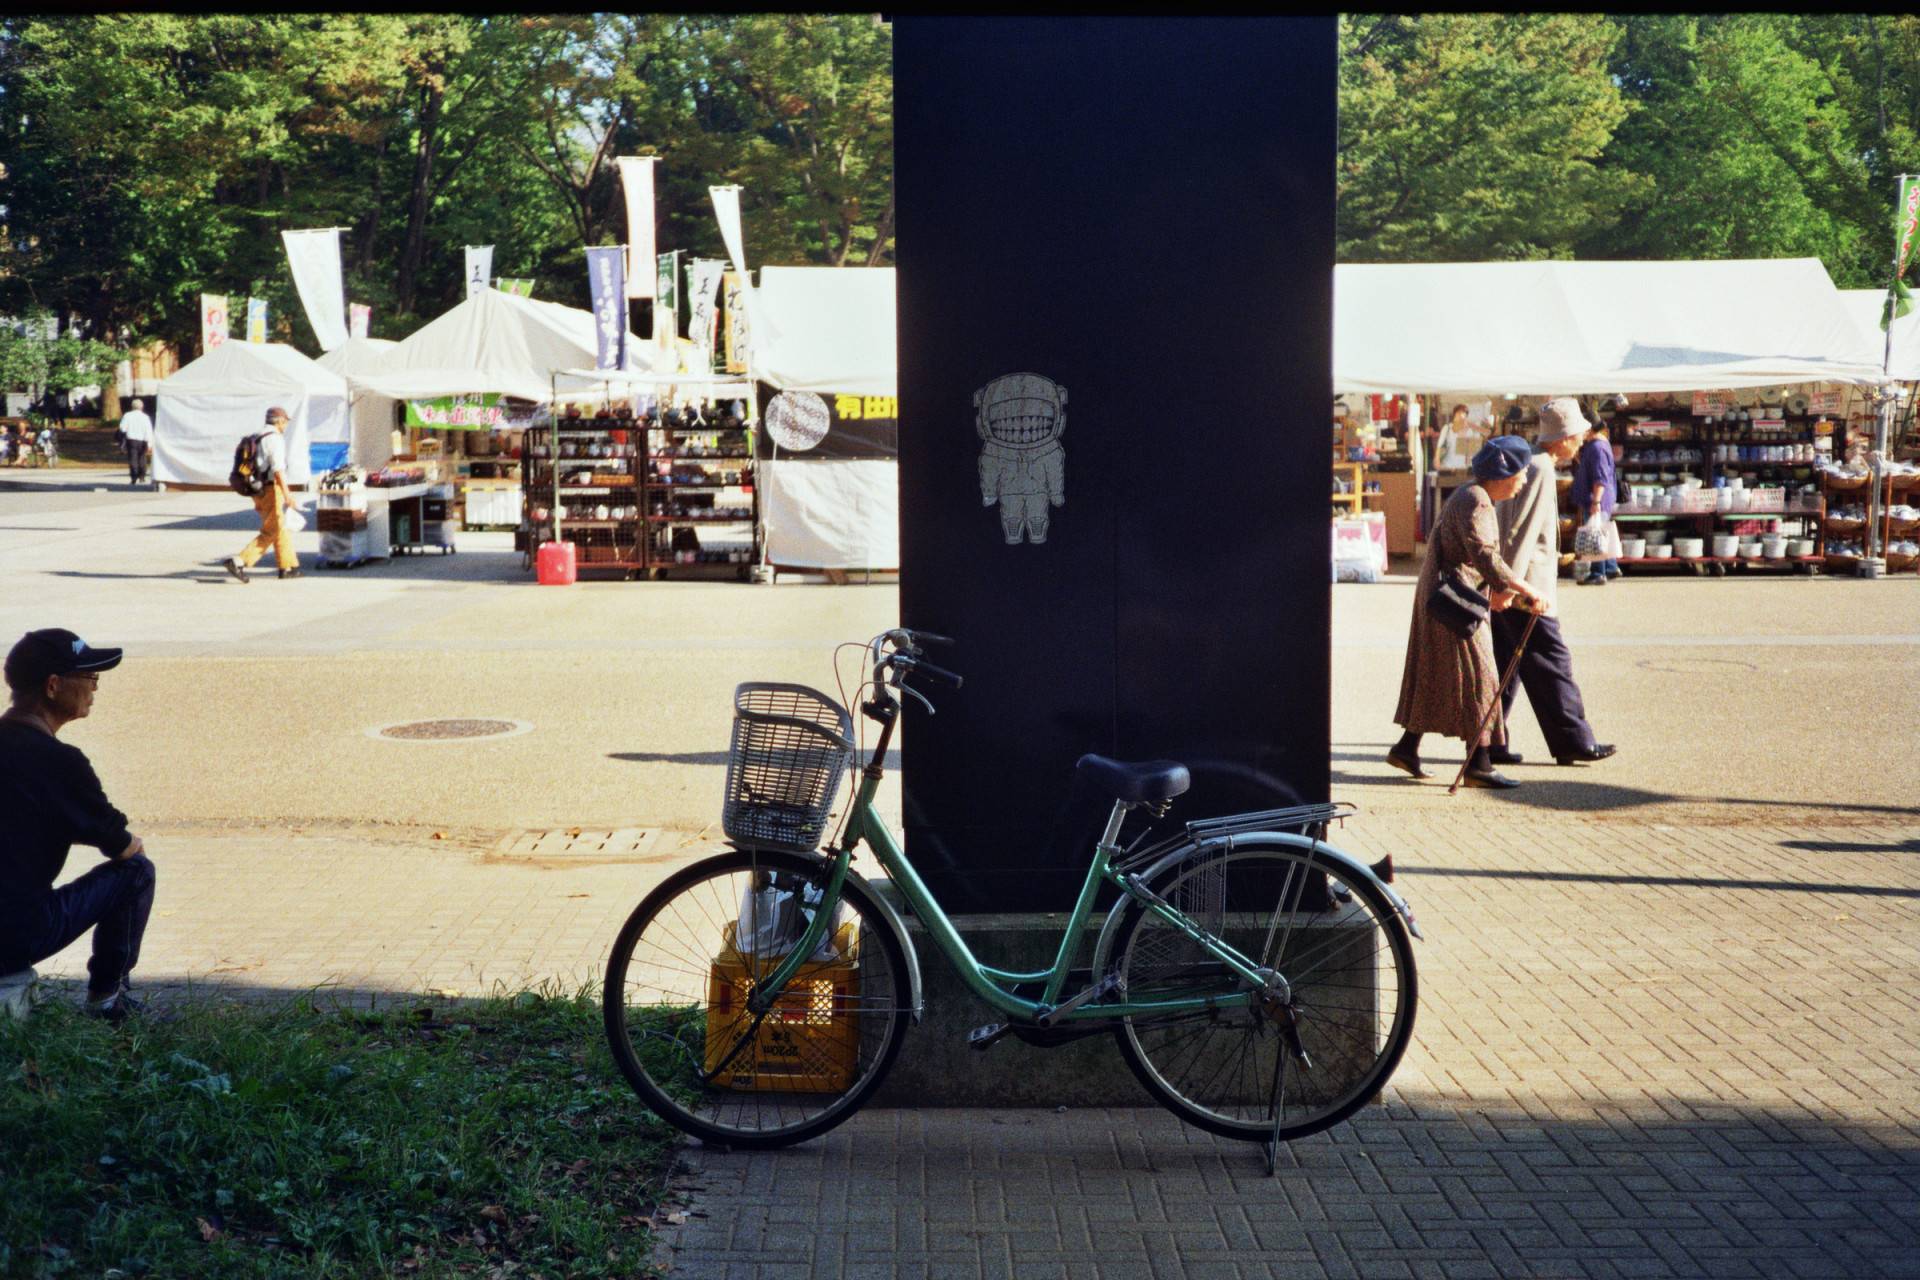 a bicycle resting in front of a dark pillar in the middle of the image, there is a small astronaut image on the pillar, a man is sitting on the left side looking at the market behind, an old couple is walking on the right side